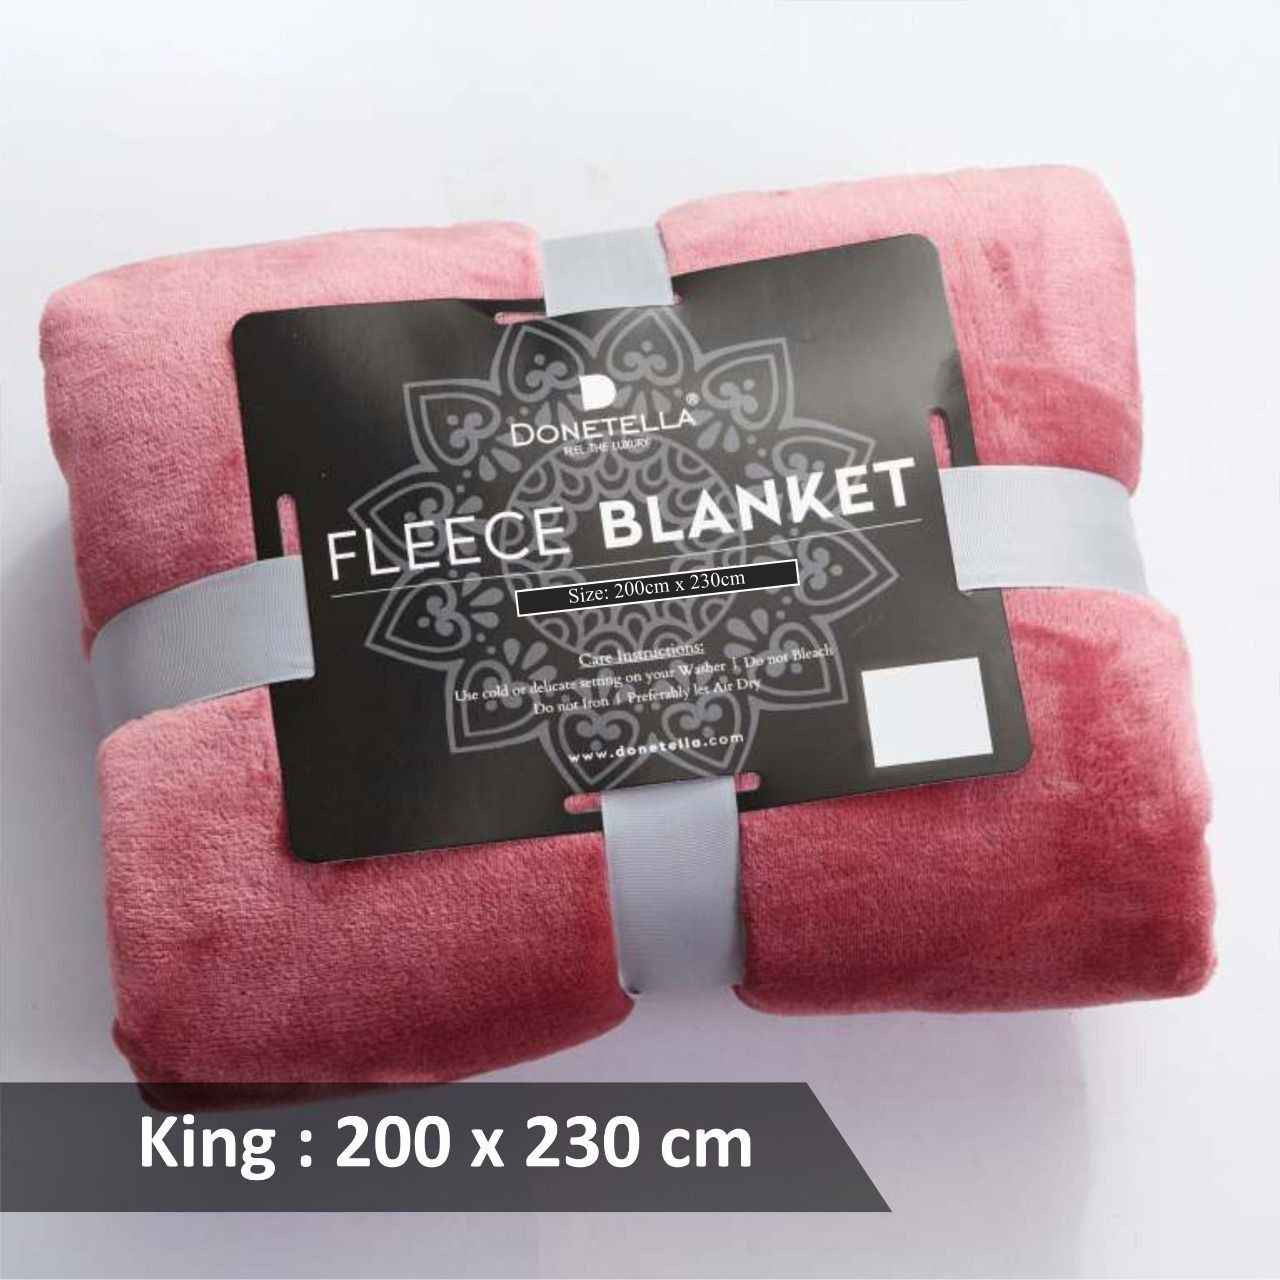 Fleece Blanket King Size,300GSM Soft and Cozy Lightweight Velvet Blanket Ideal For Couch, Bed, Travel, Camping , Peach